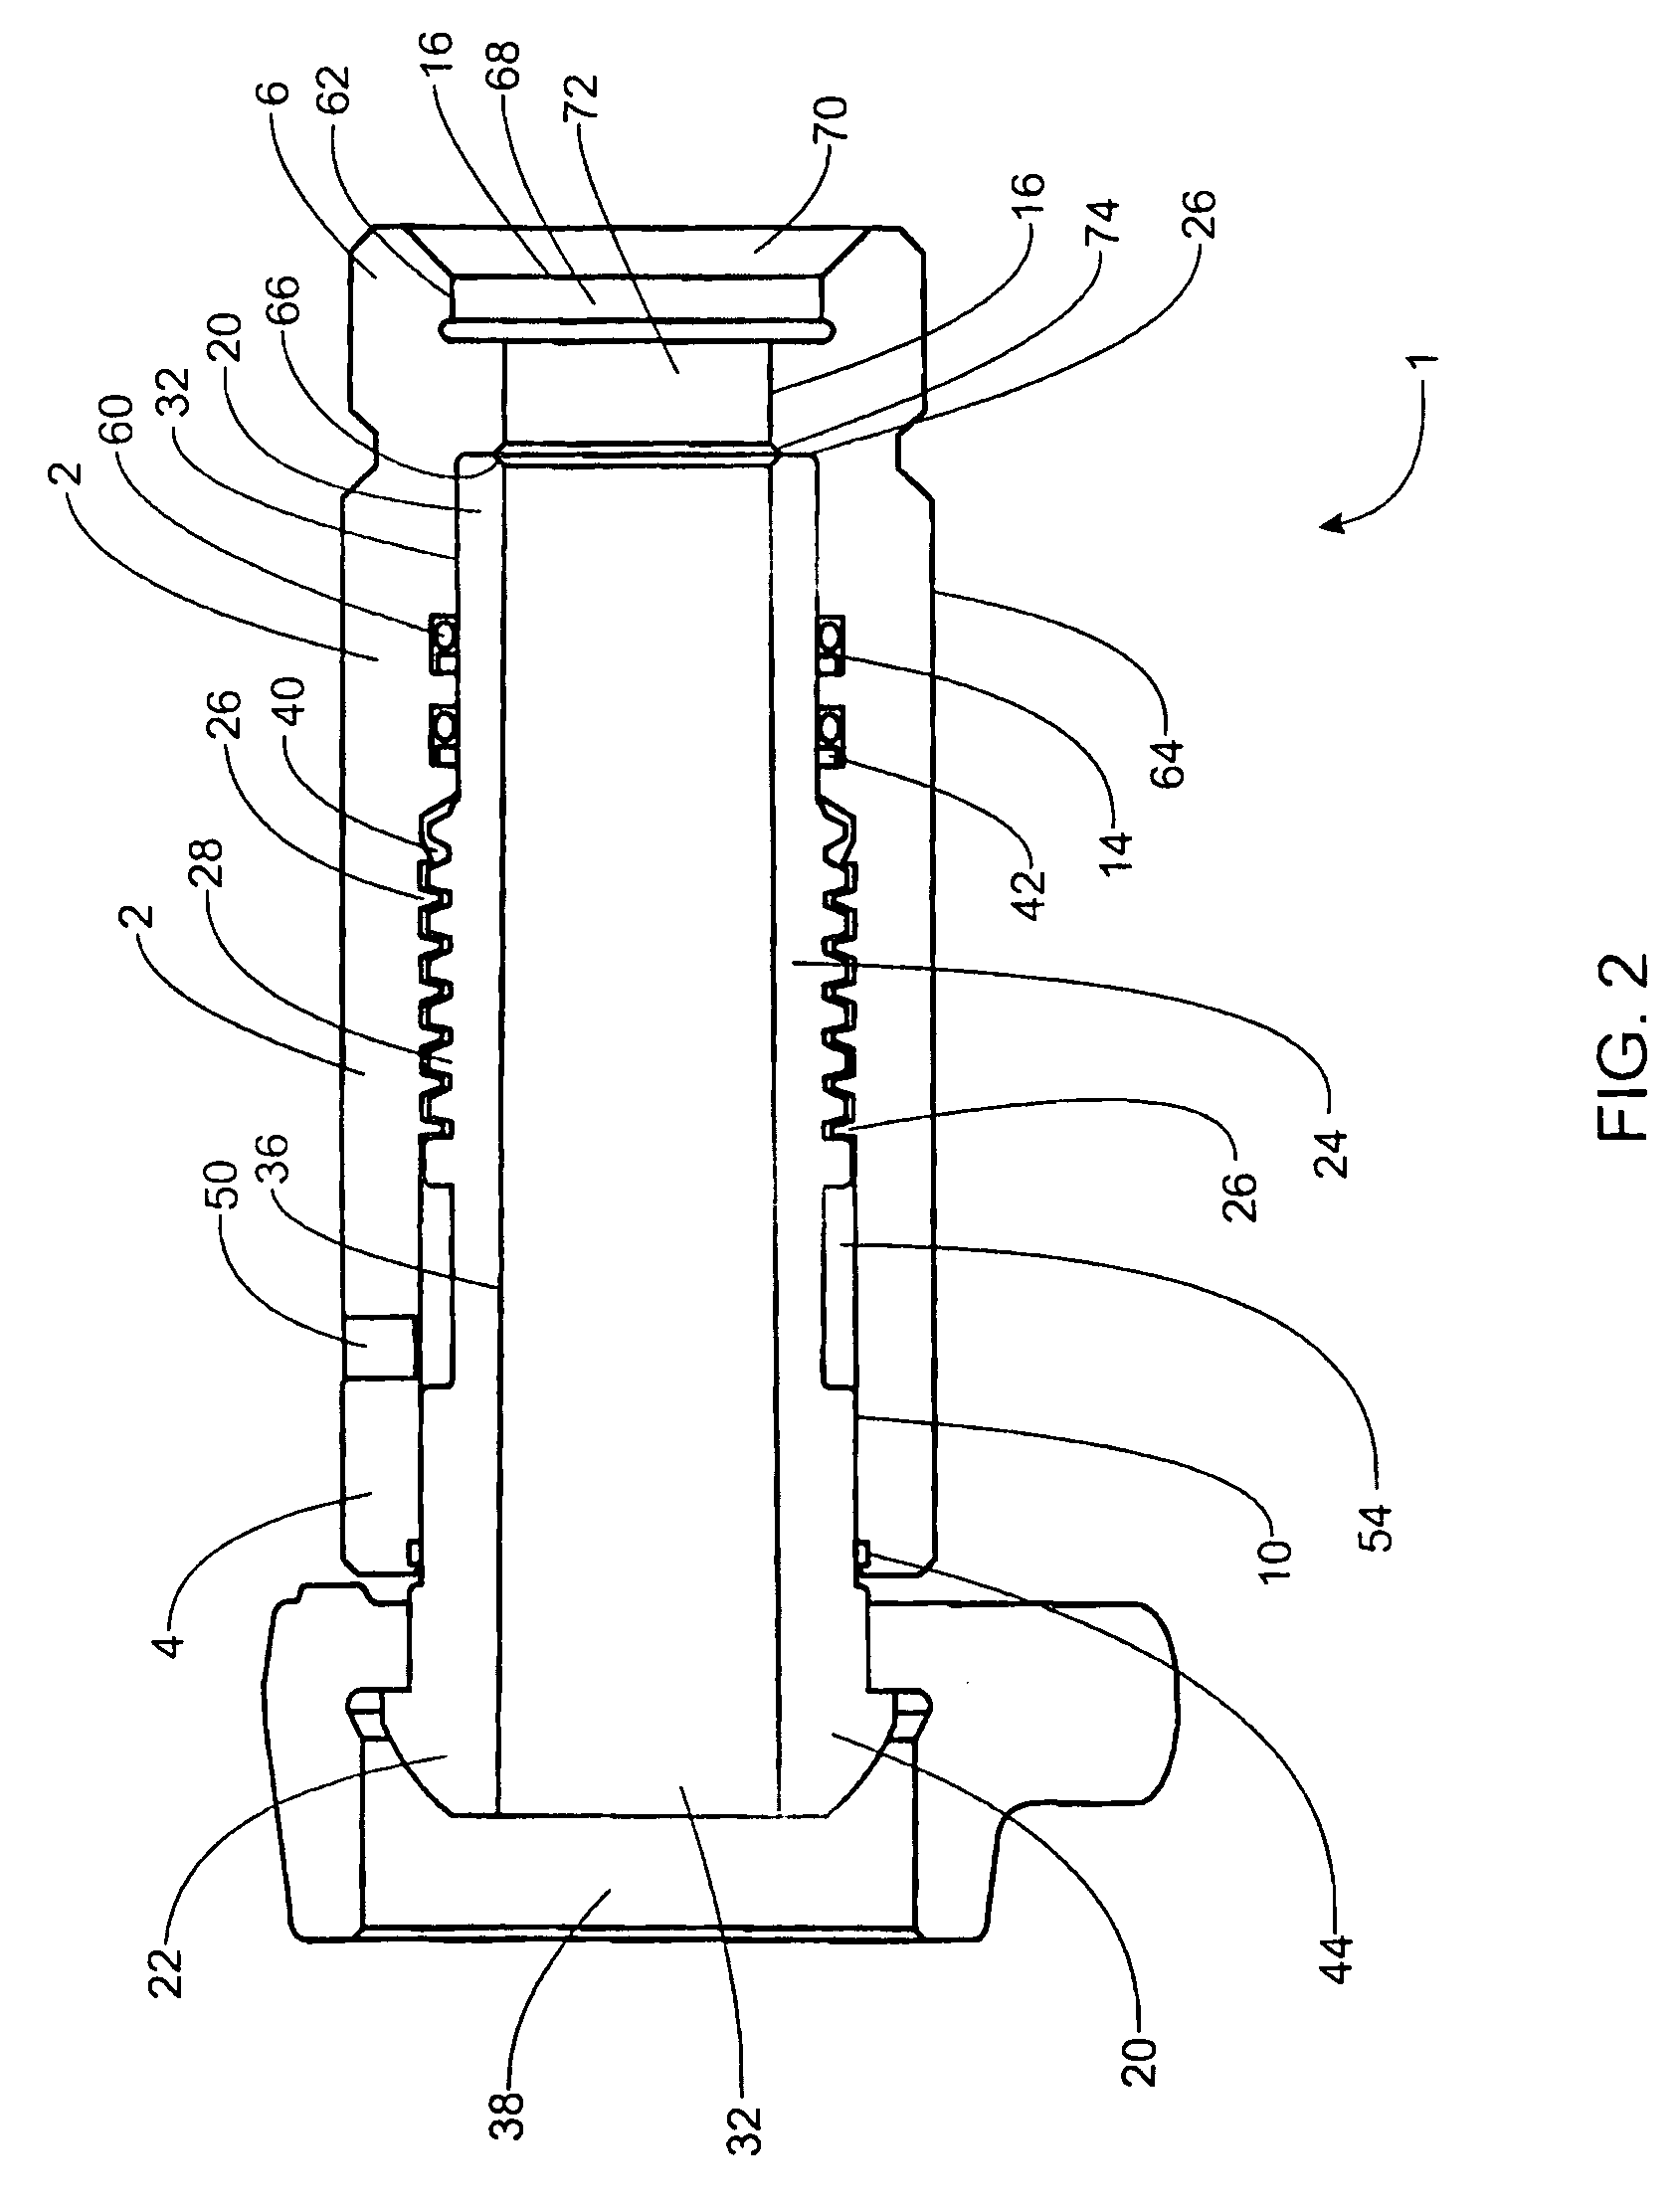 Adjustable Length Discharge Joint for High Pressure Applications